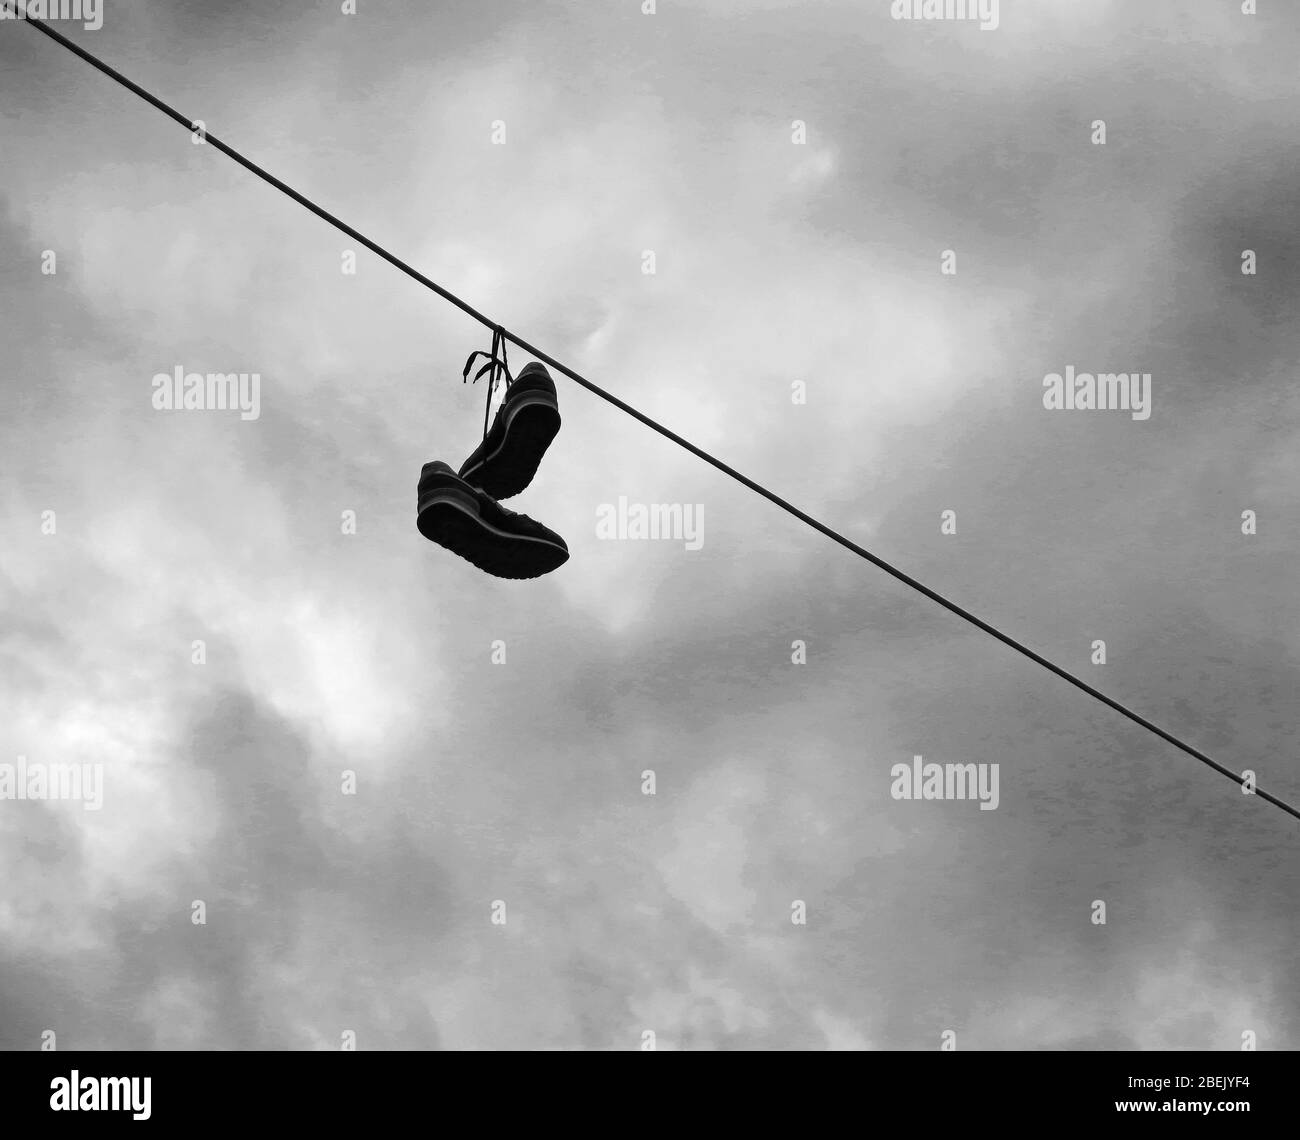 Pair of shoes tied together, thrown on an electricity line as a prank to somebody. Concept: minimalism in photography. Stock Photo